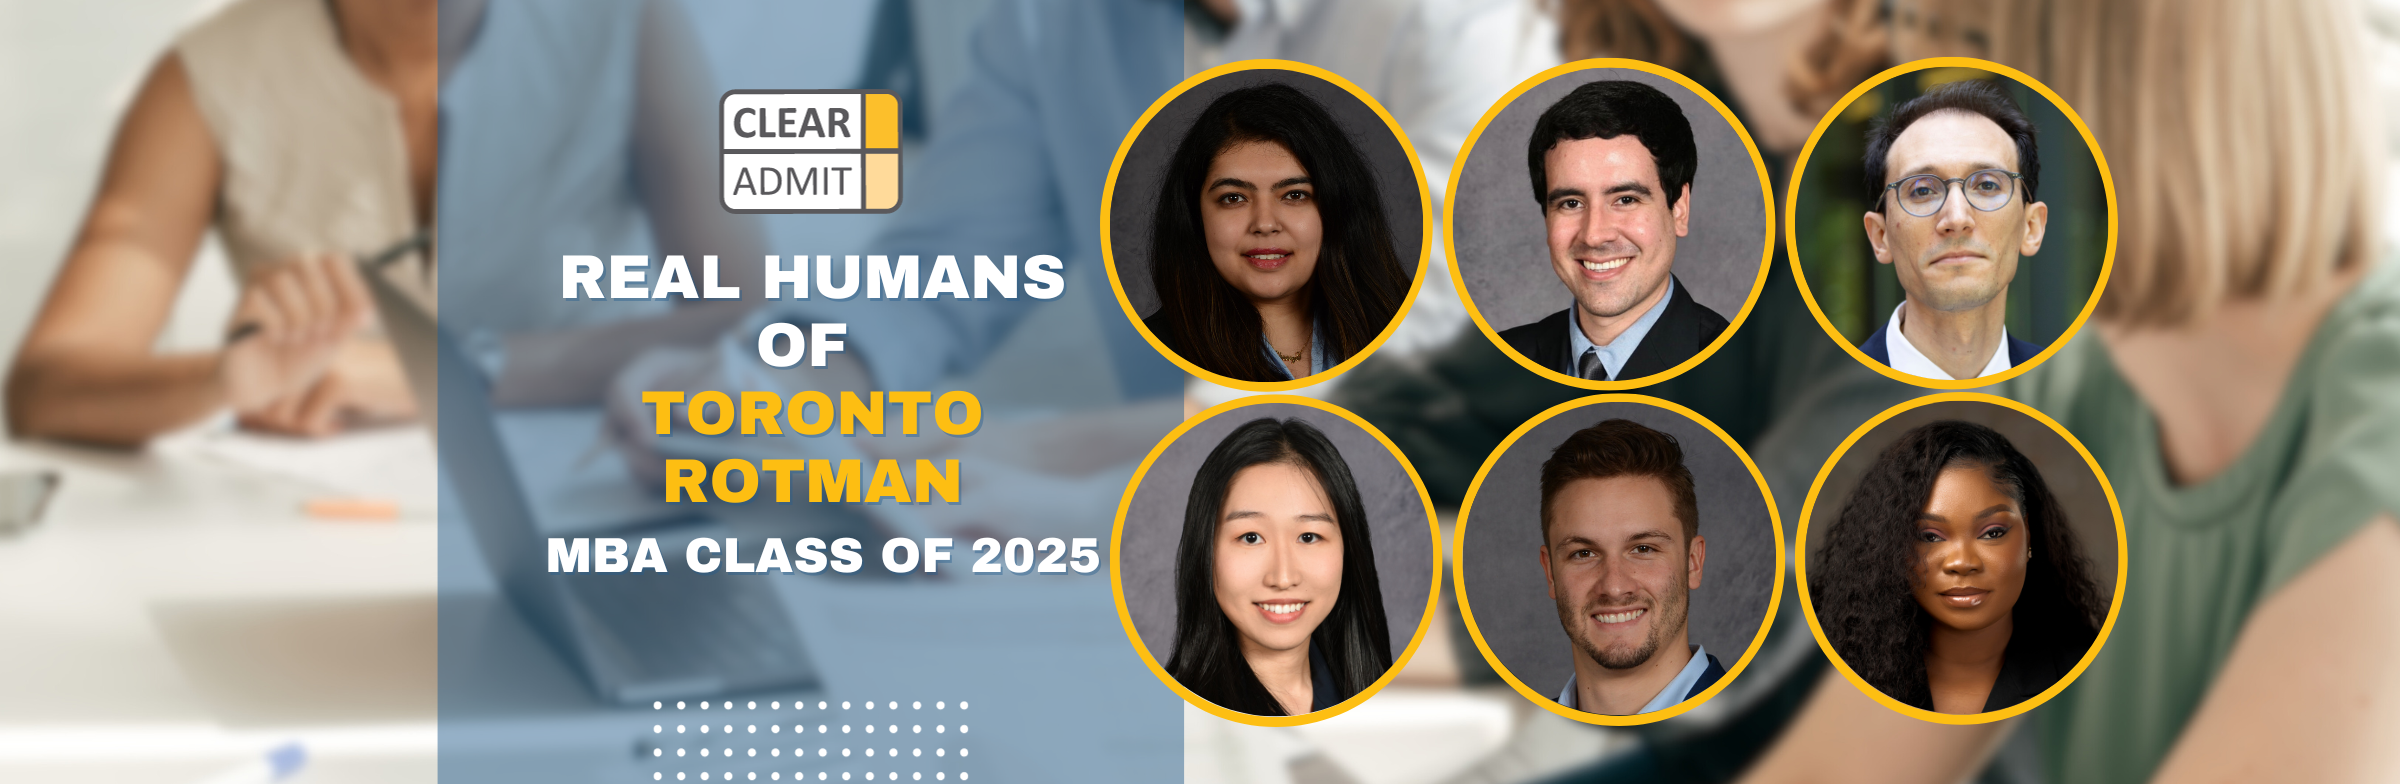 Image for Real Humans of Toronto Rotman’s MBA Class of 2025